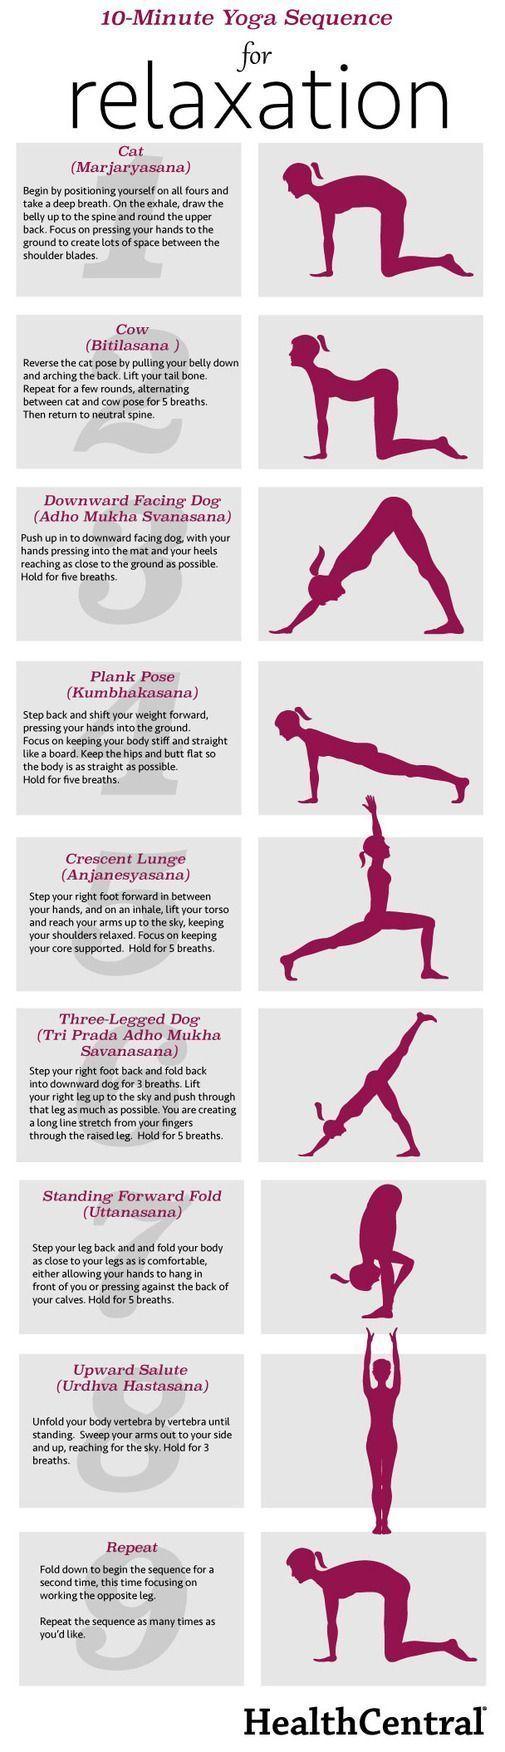 Mariage - 10-Minute Yoga Sequence For Relaxation (INFOGRAPHIC) - Exercise - Anxiety